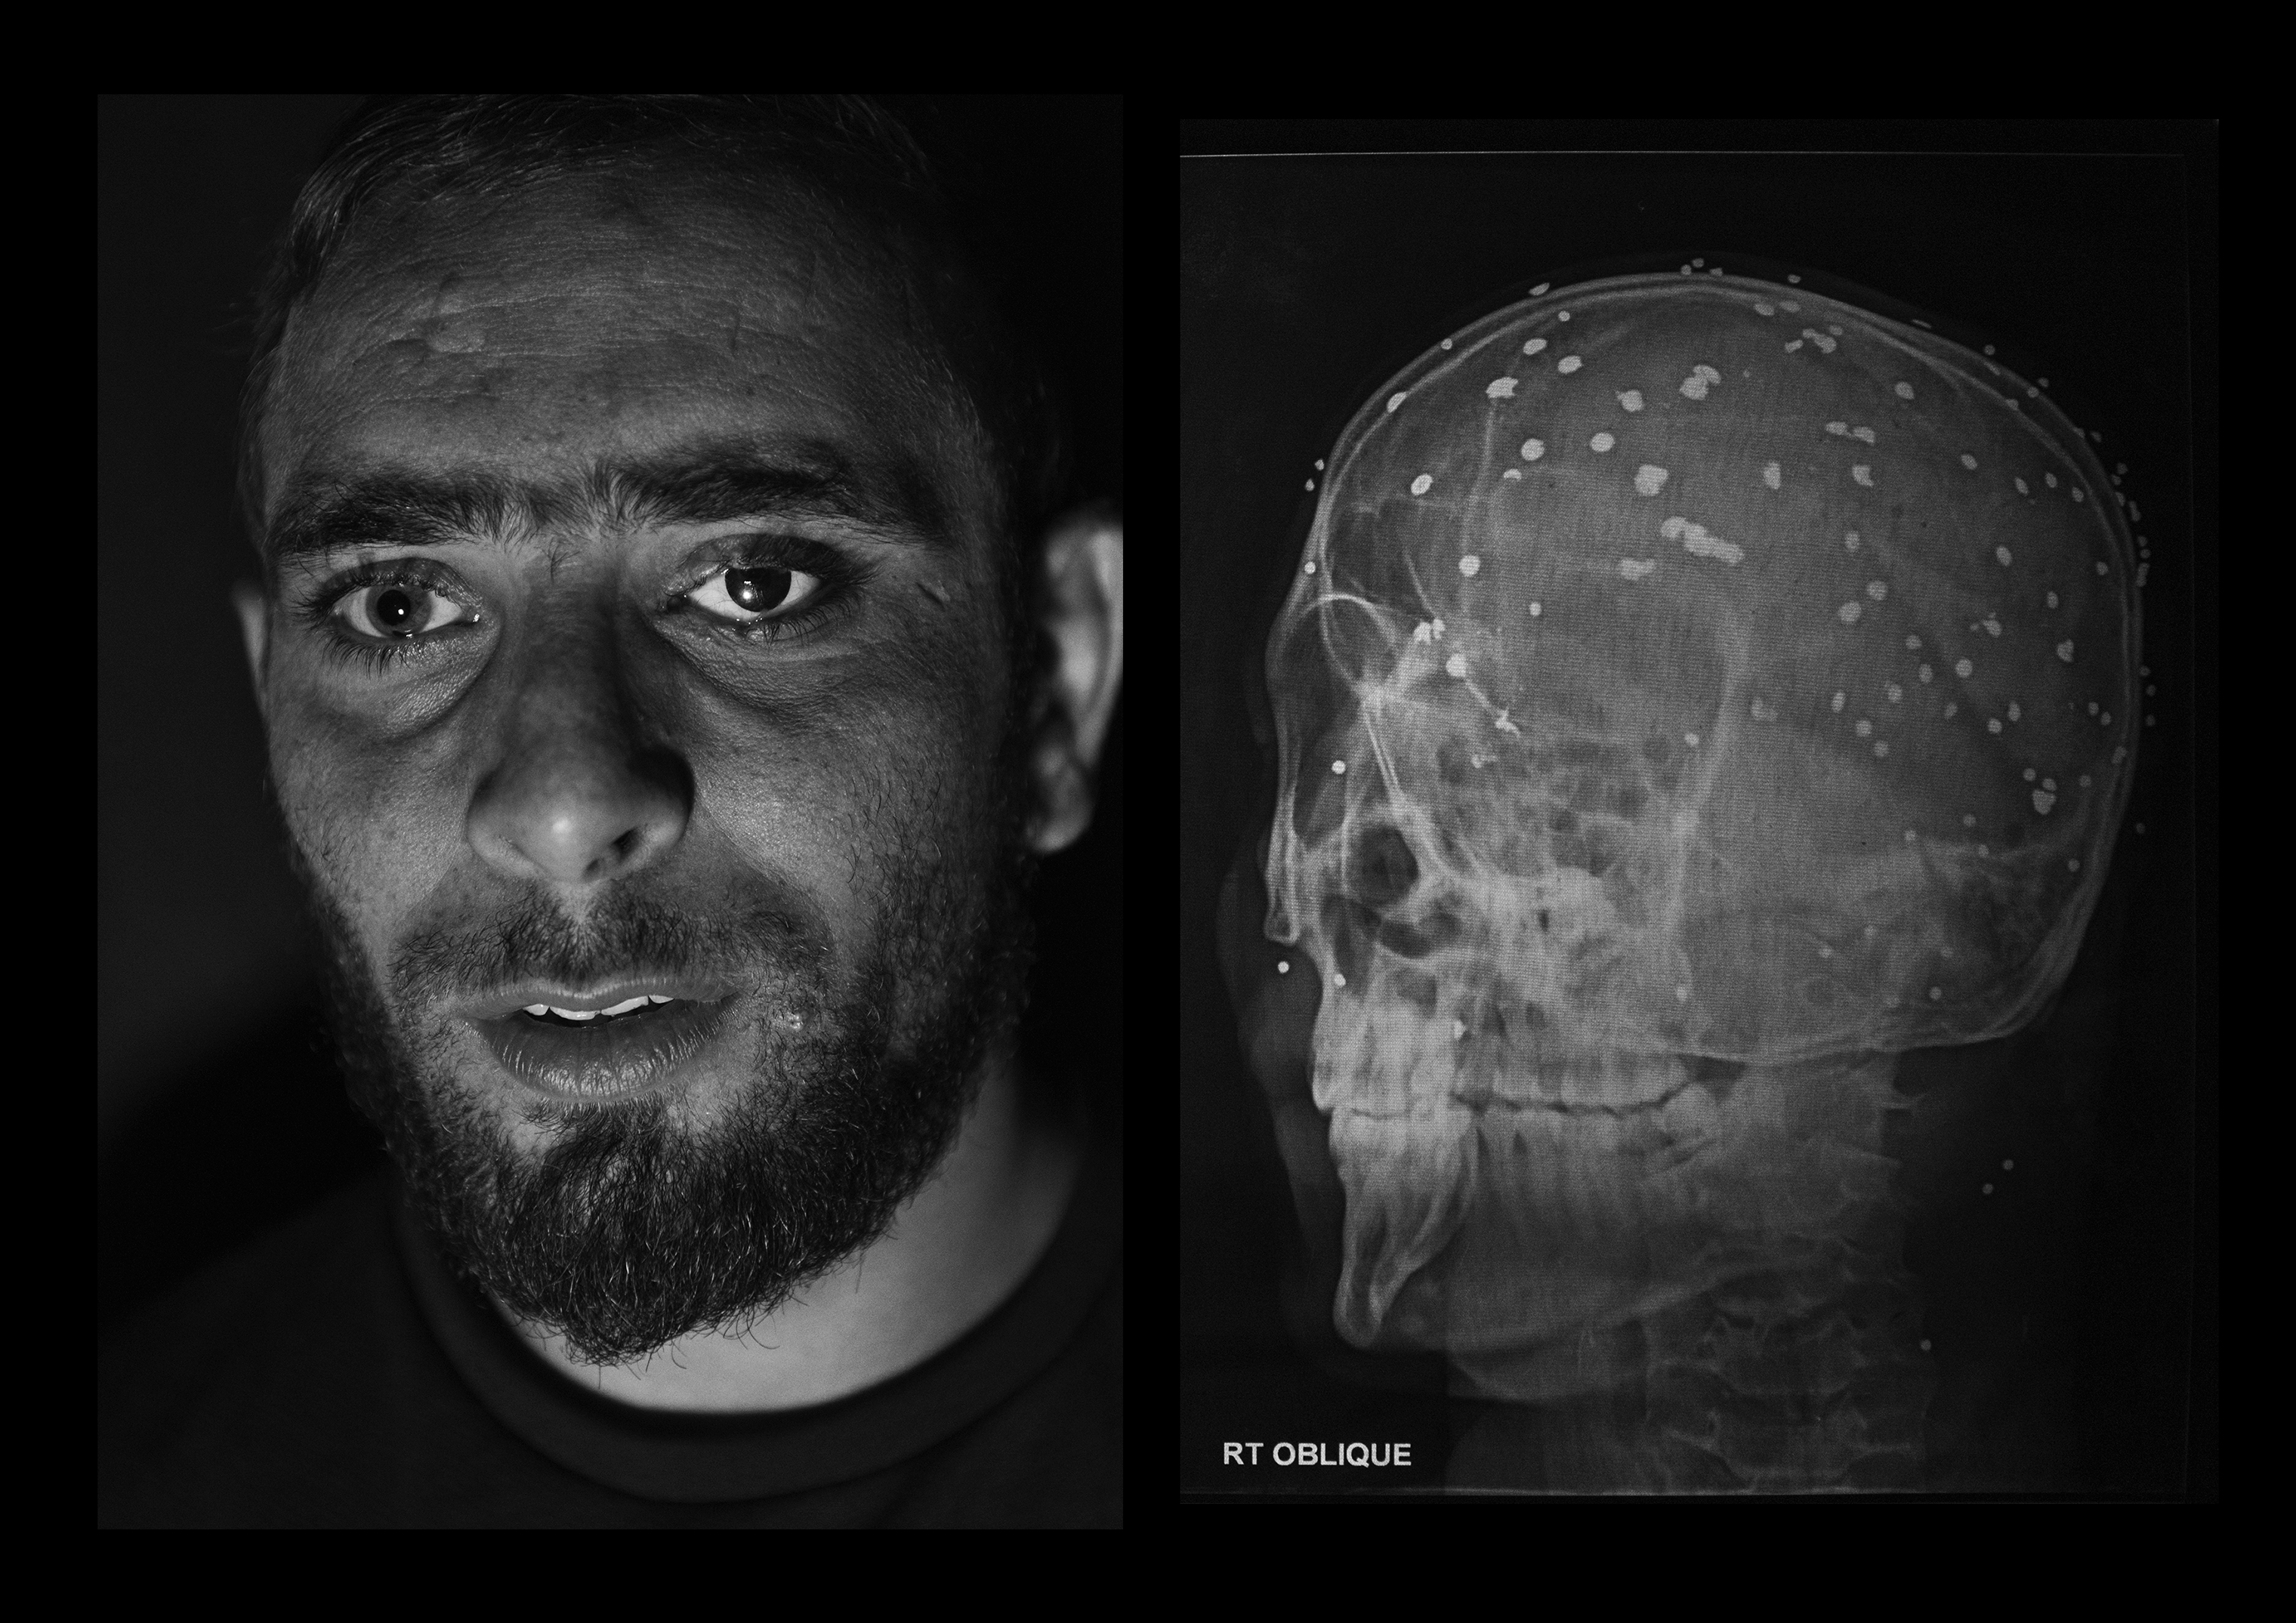 Danish Rajab Jhat, 24 years old, from Srinagar. His left eye was unsalvageable, so doctors replaced it with an artificial eyeball. He still has 90 pellets inside his body and from his right eye he can barely see shadows. (Camillo Pasquarelli)